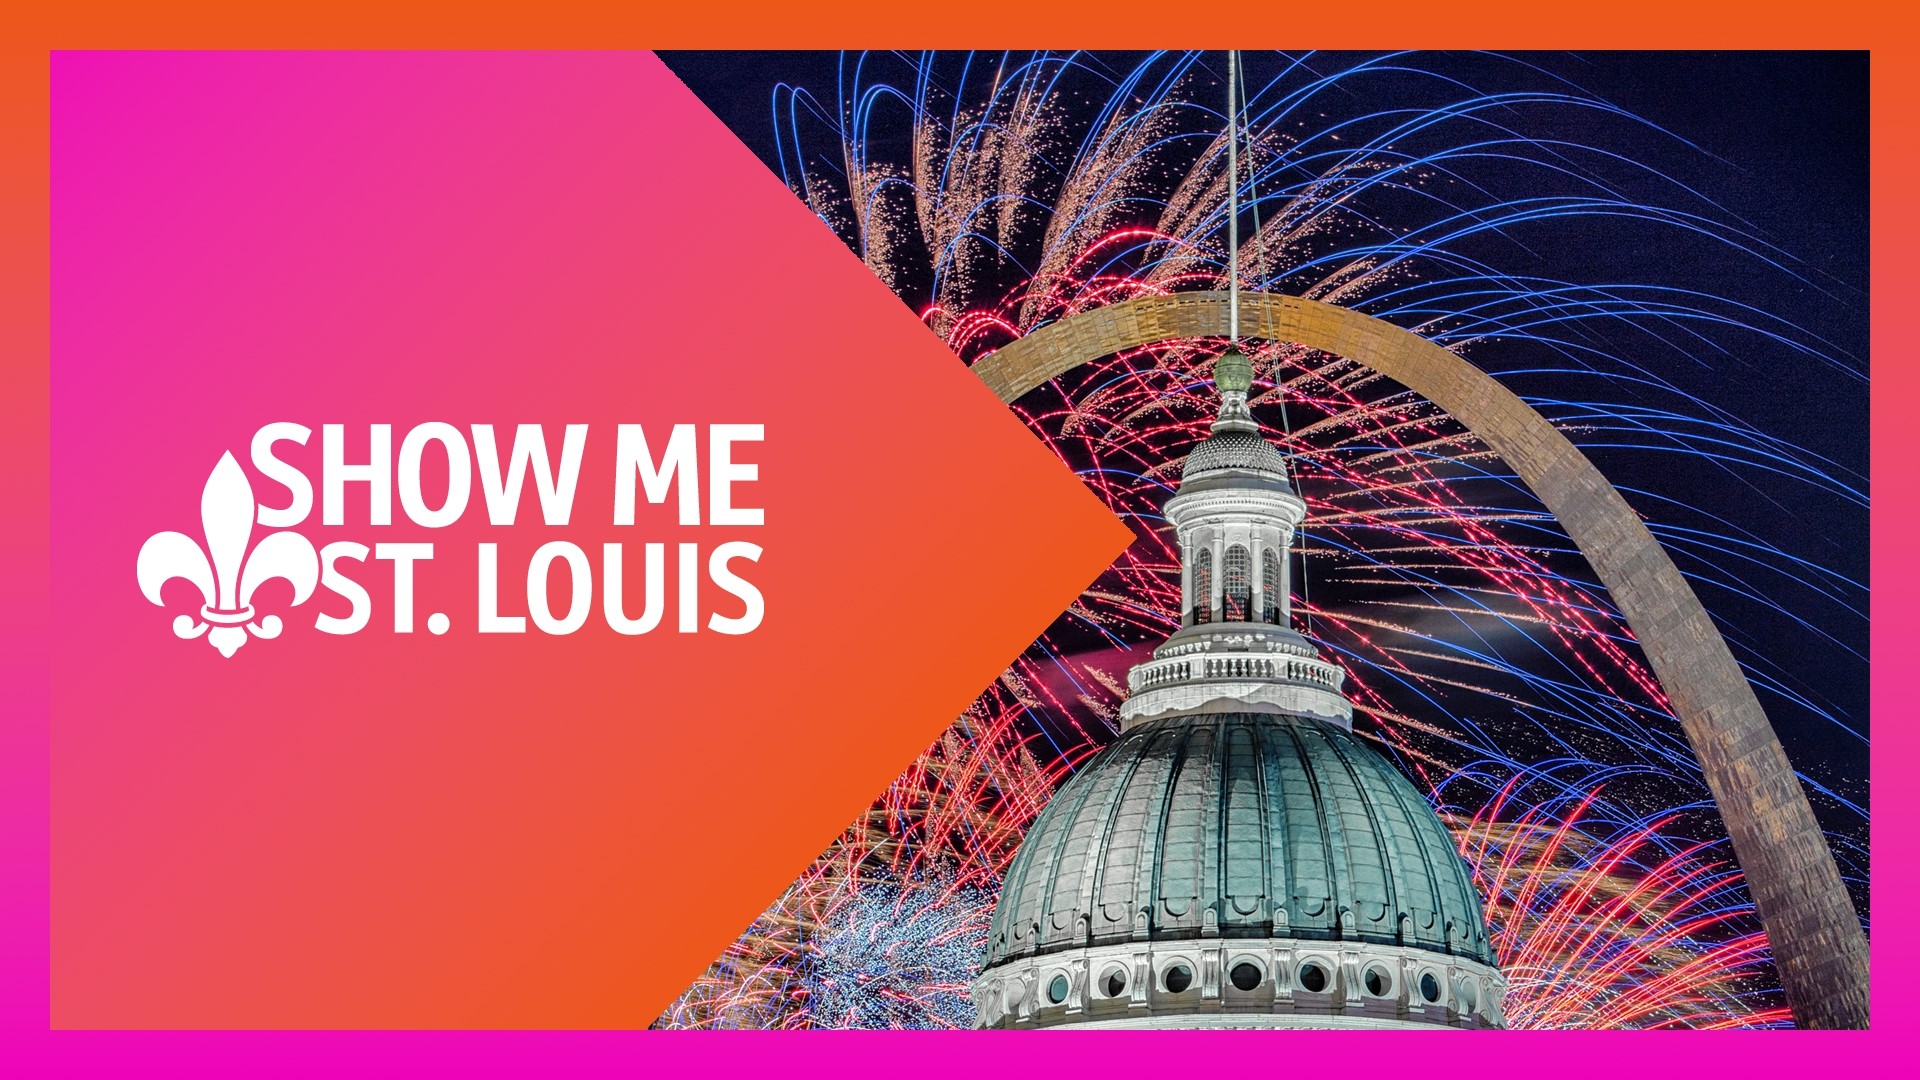 St. Louis' longest-running live and local lifestyle show. Consider us your guide to everything St. Louis. Featuring hidden gems, interesting people and what's new.